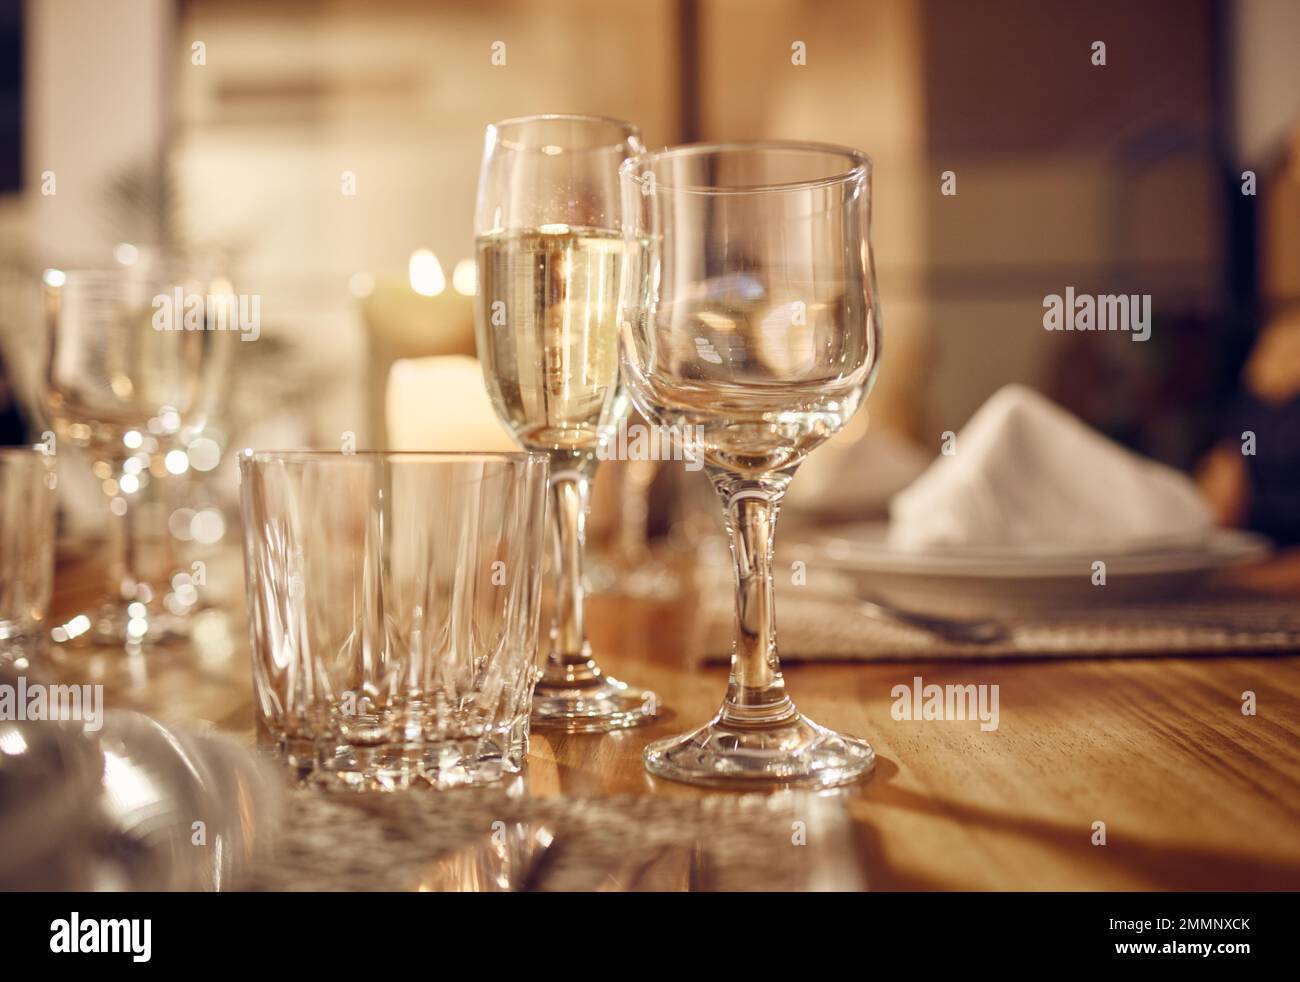 Drink, glass and dinner with party, celebration event with glassware, elegant and luxury in restaurant or banquet. Table setting, alcohol and Stock Photo